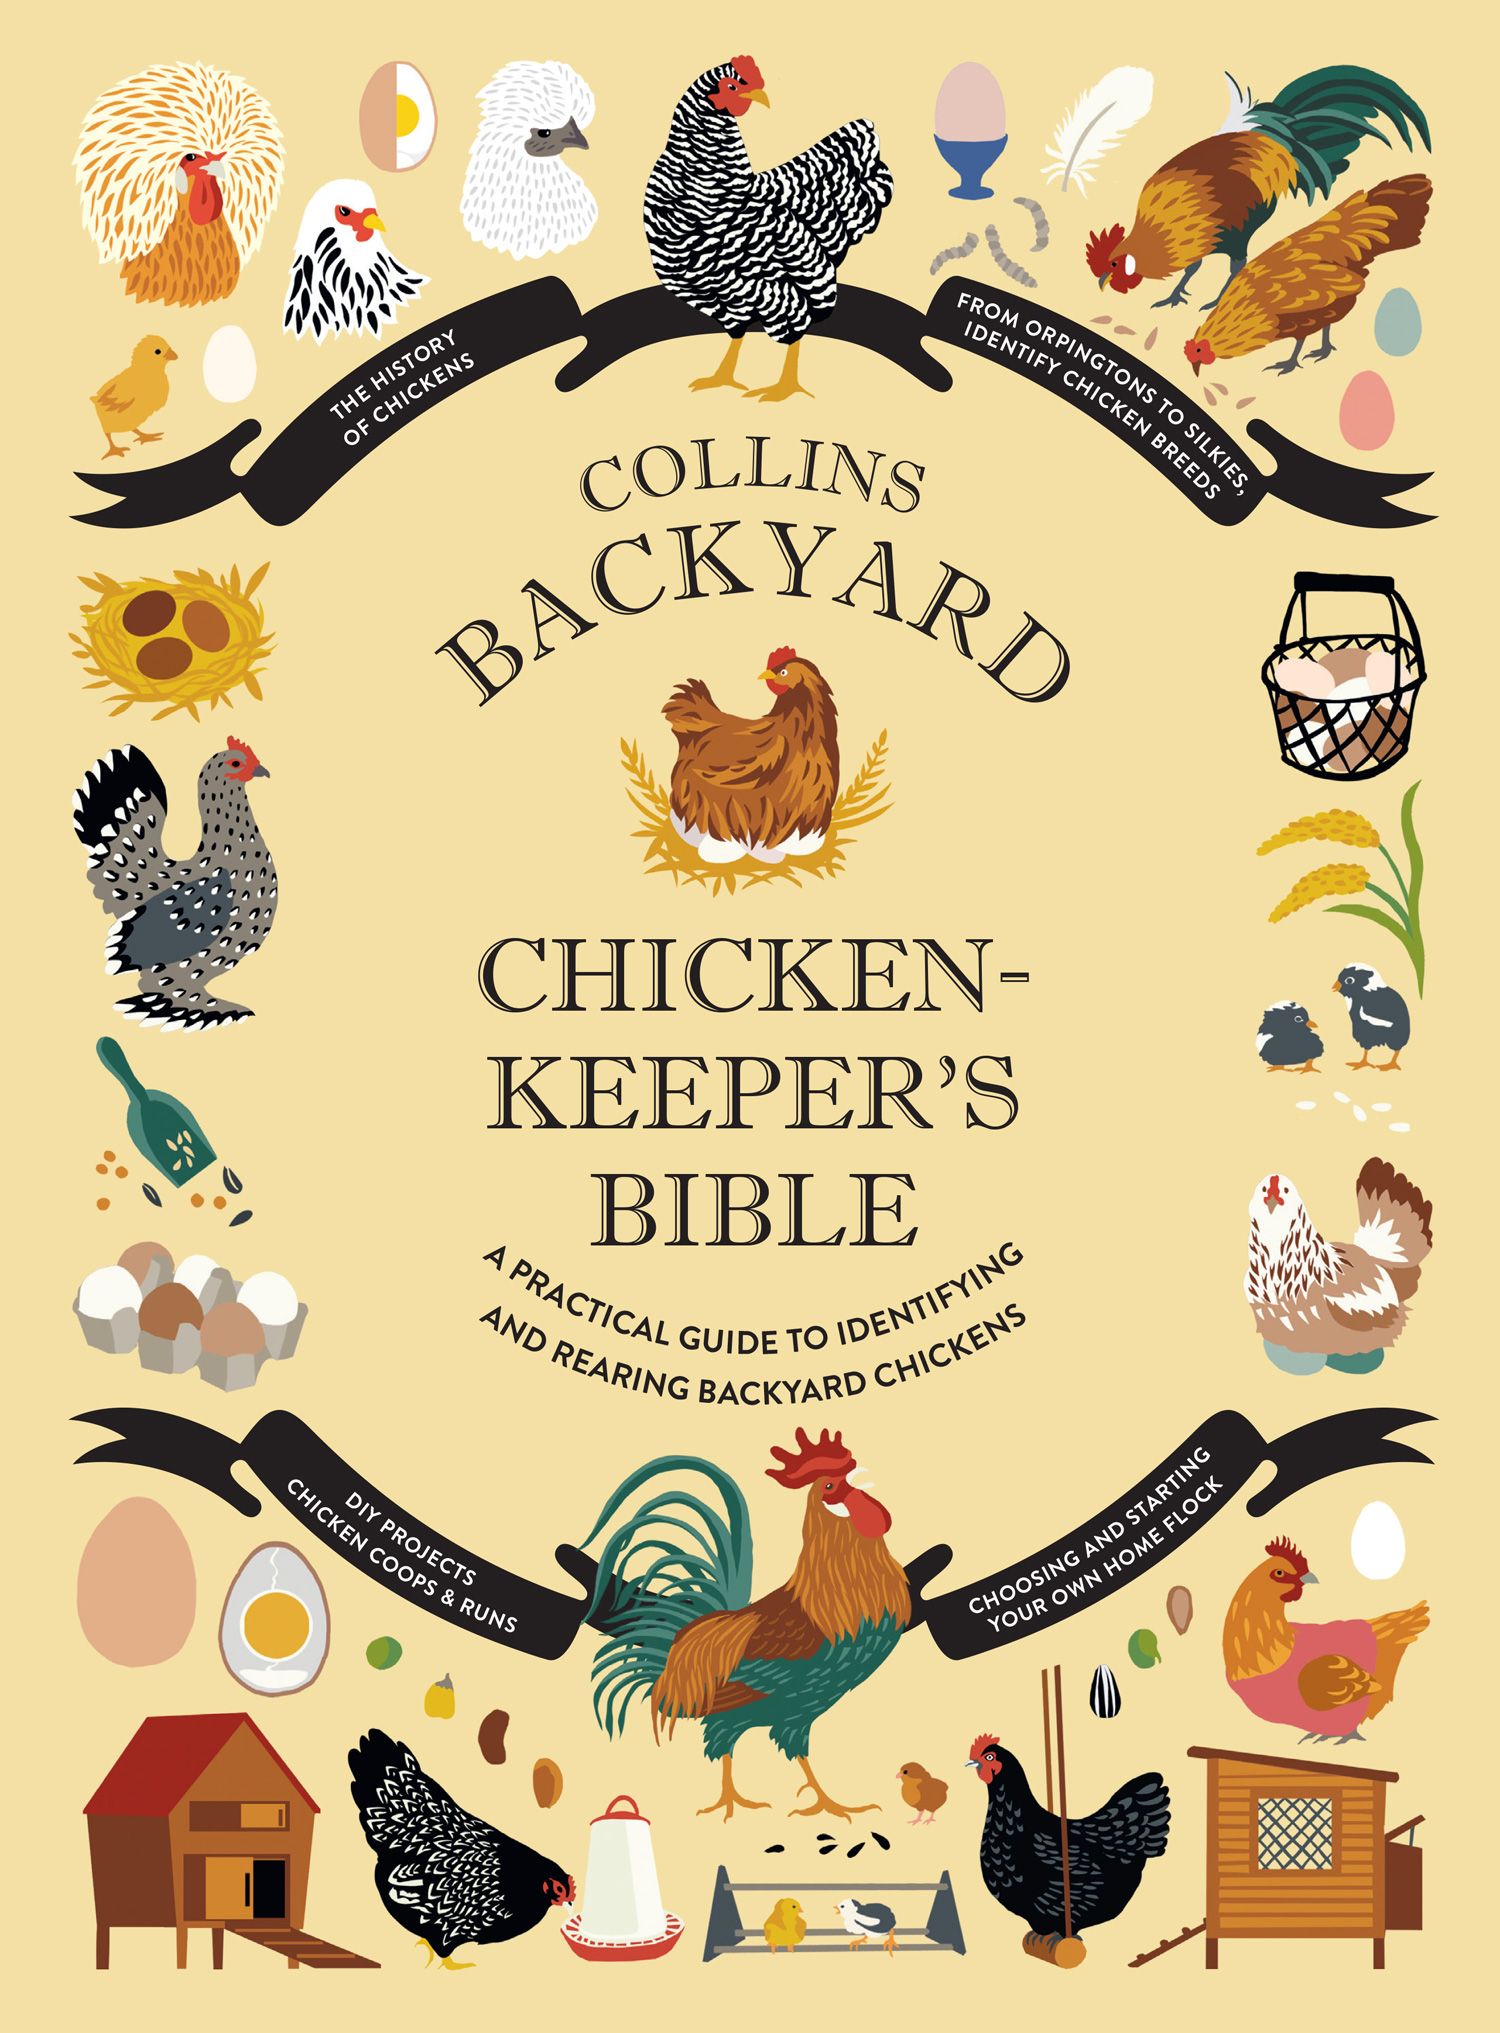 Pam's Backyard Chickens: A Guide to Chicken Feather Types